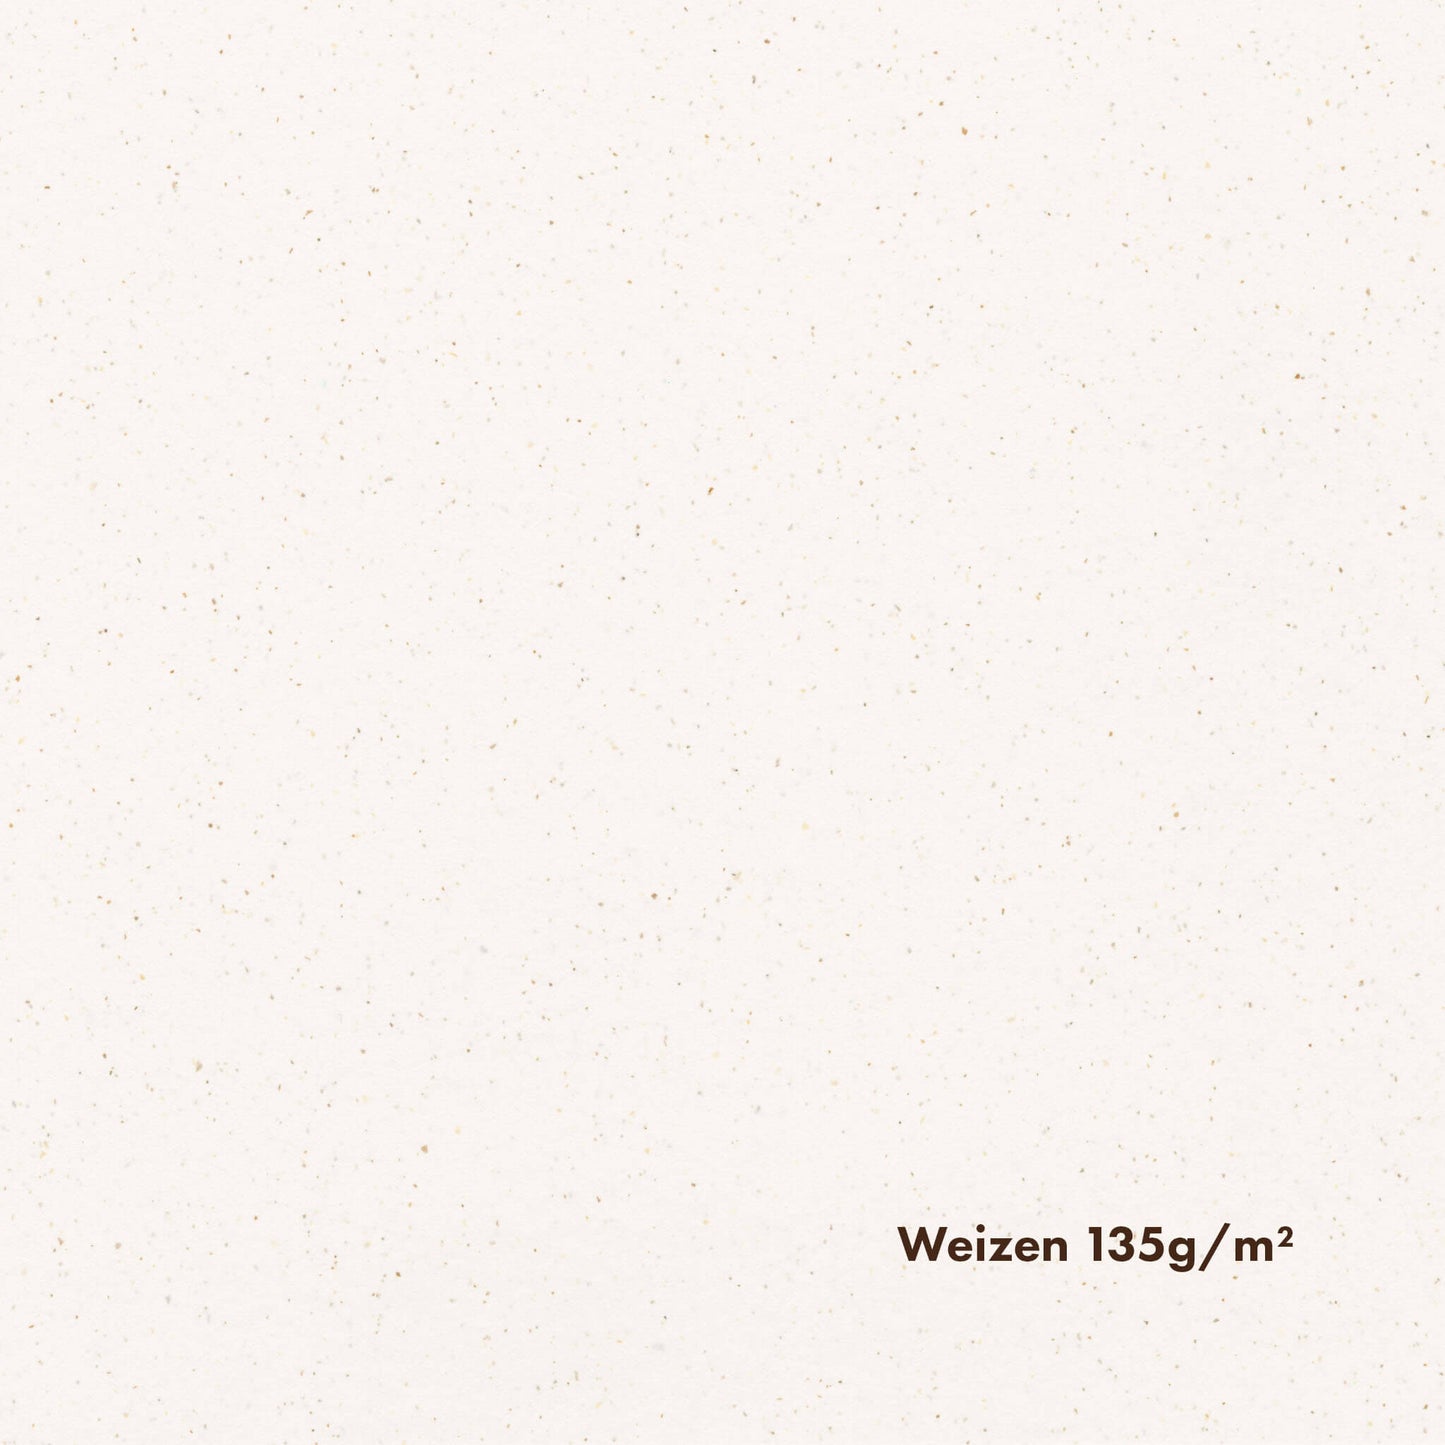 Close-up of white toned pulp paper with distinct brownish speckles throughout. The text 'Weizen 135g/m2' is typed on the paper.